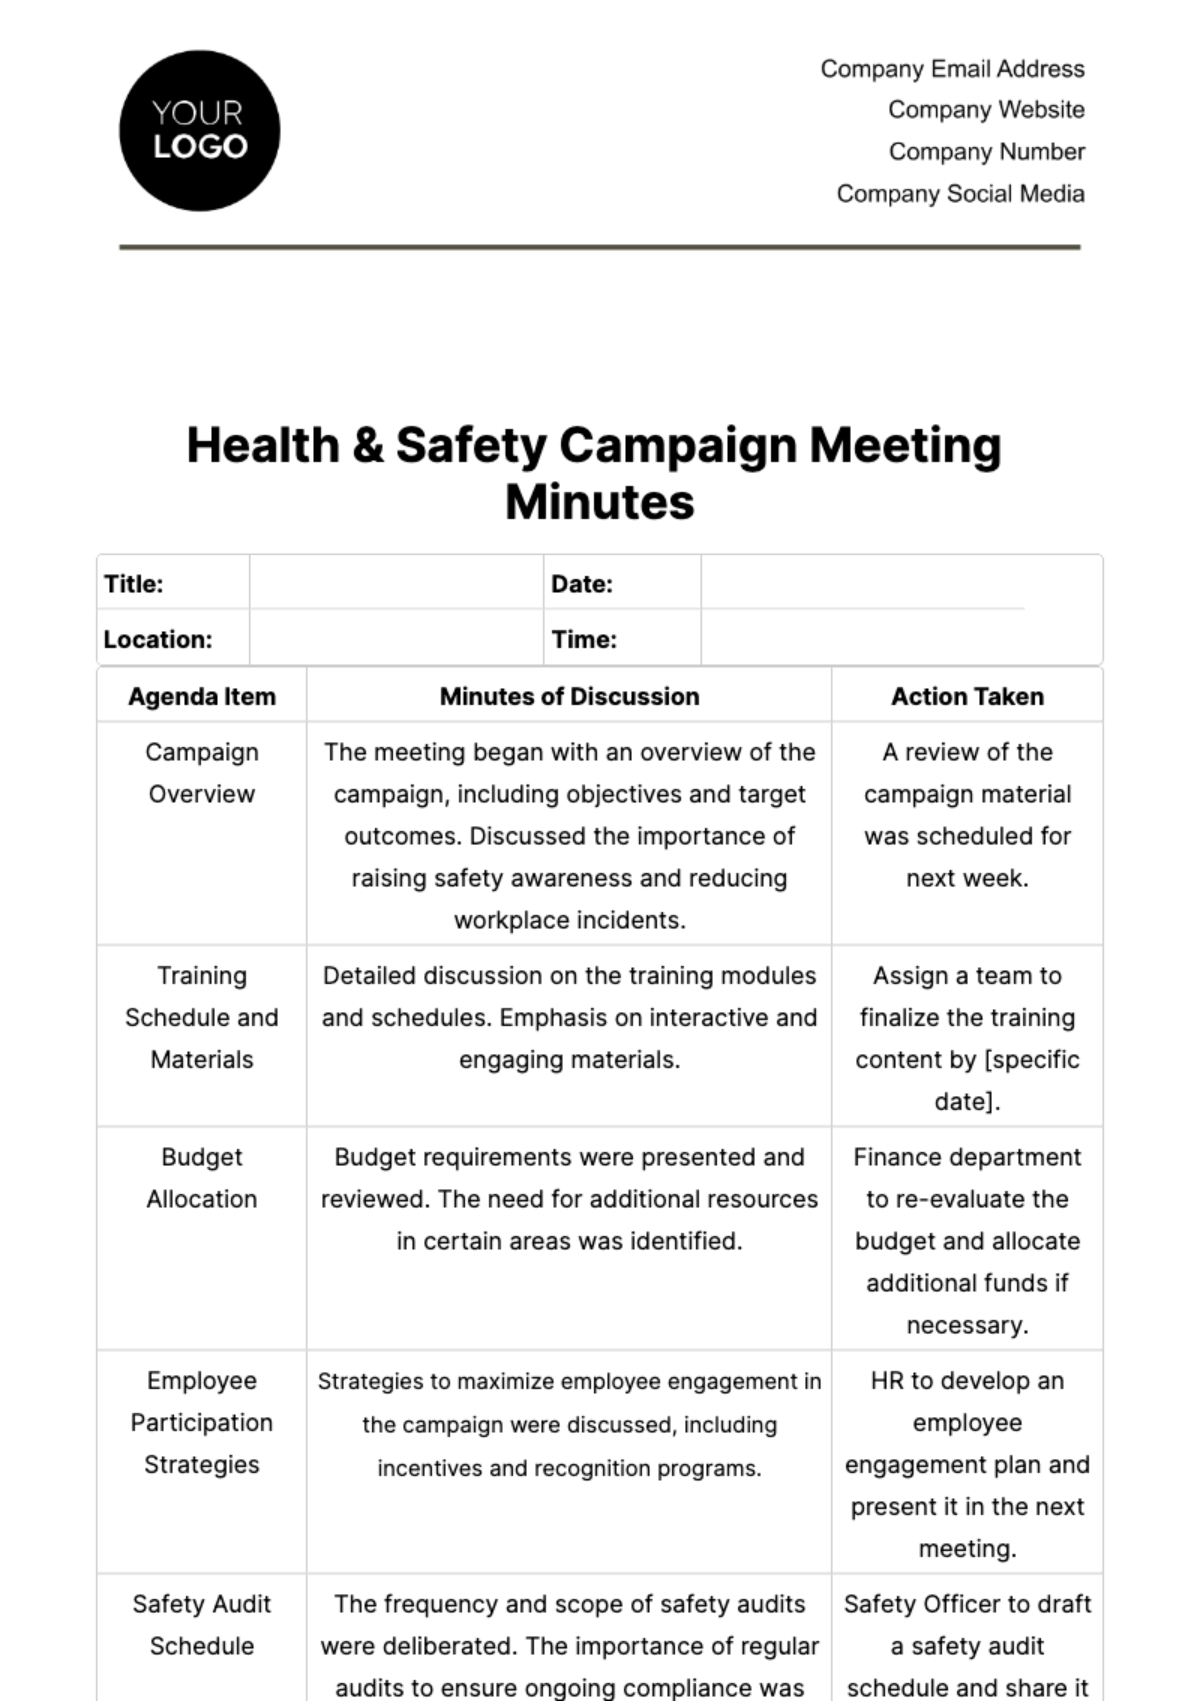 Health & Safety Campaign Meeting Minutes Template